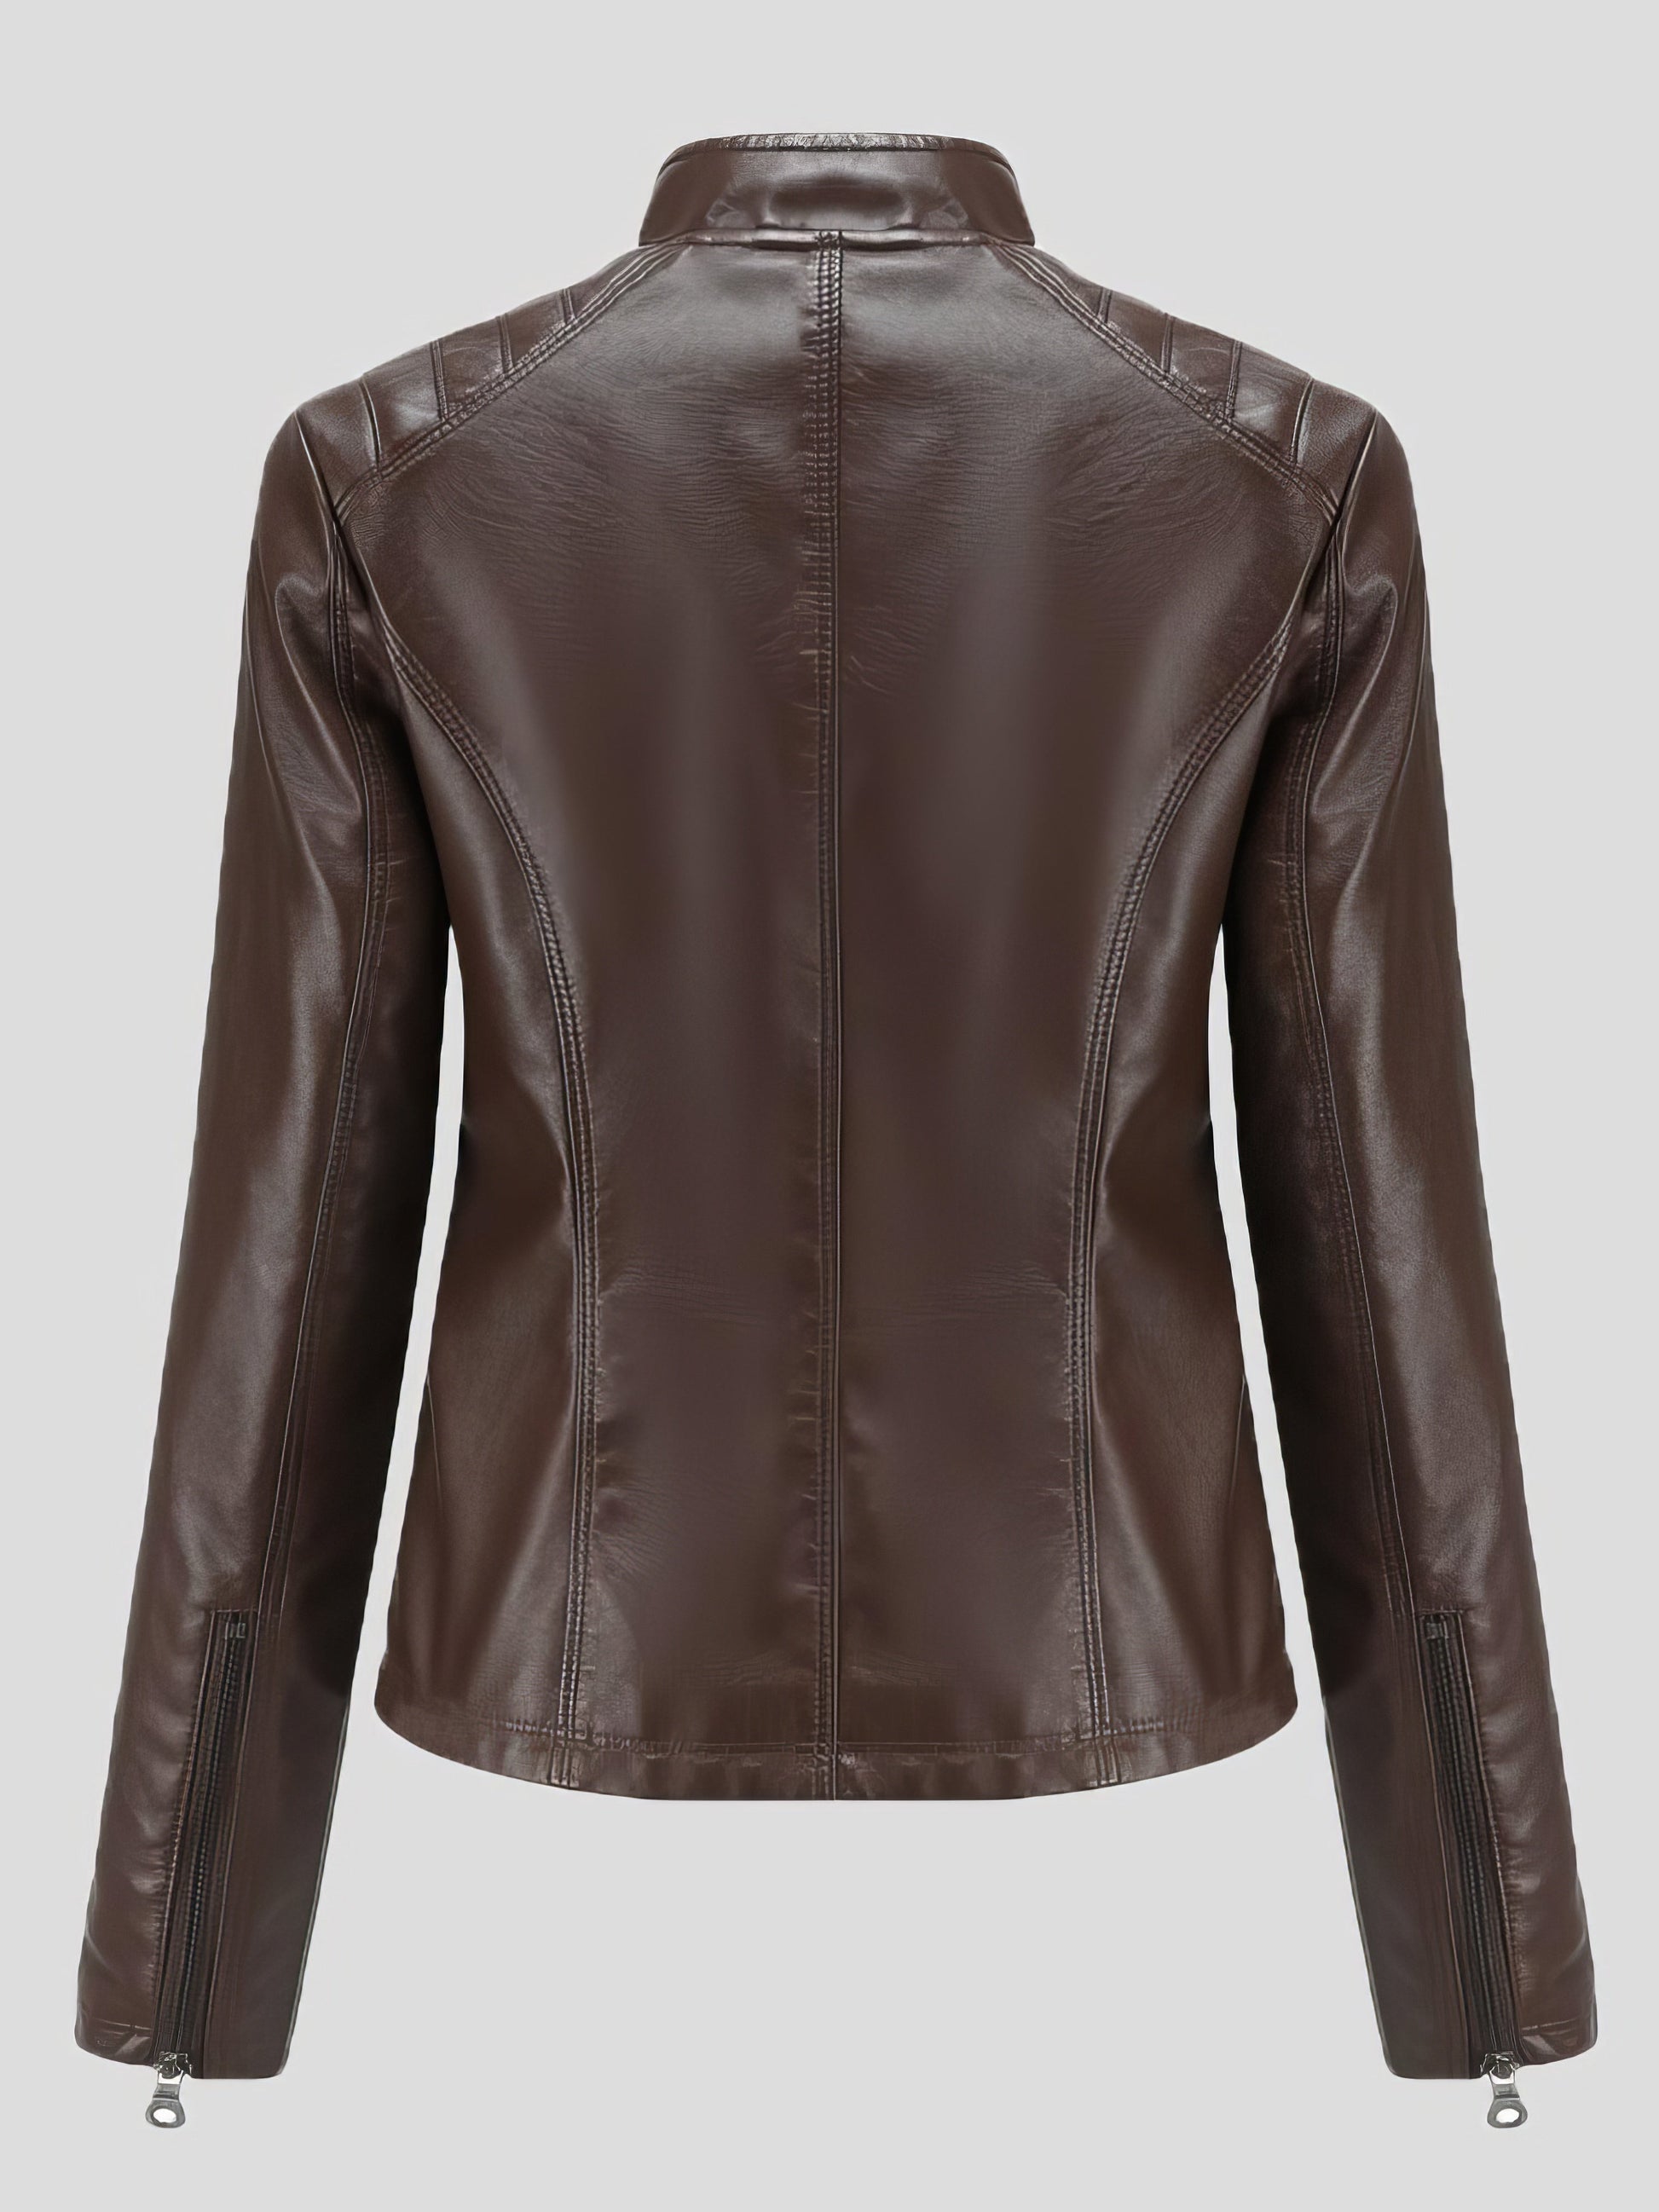 Jackets - Casual Stand-Collar Slim Solid Leather Jacket - MsDressly